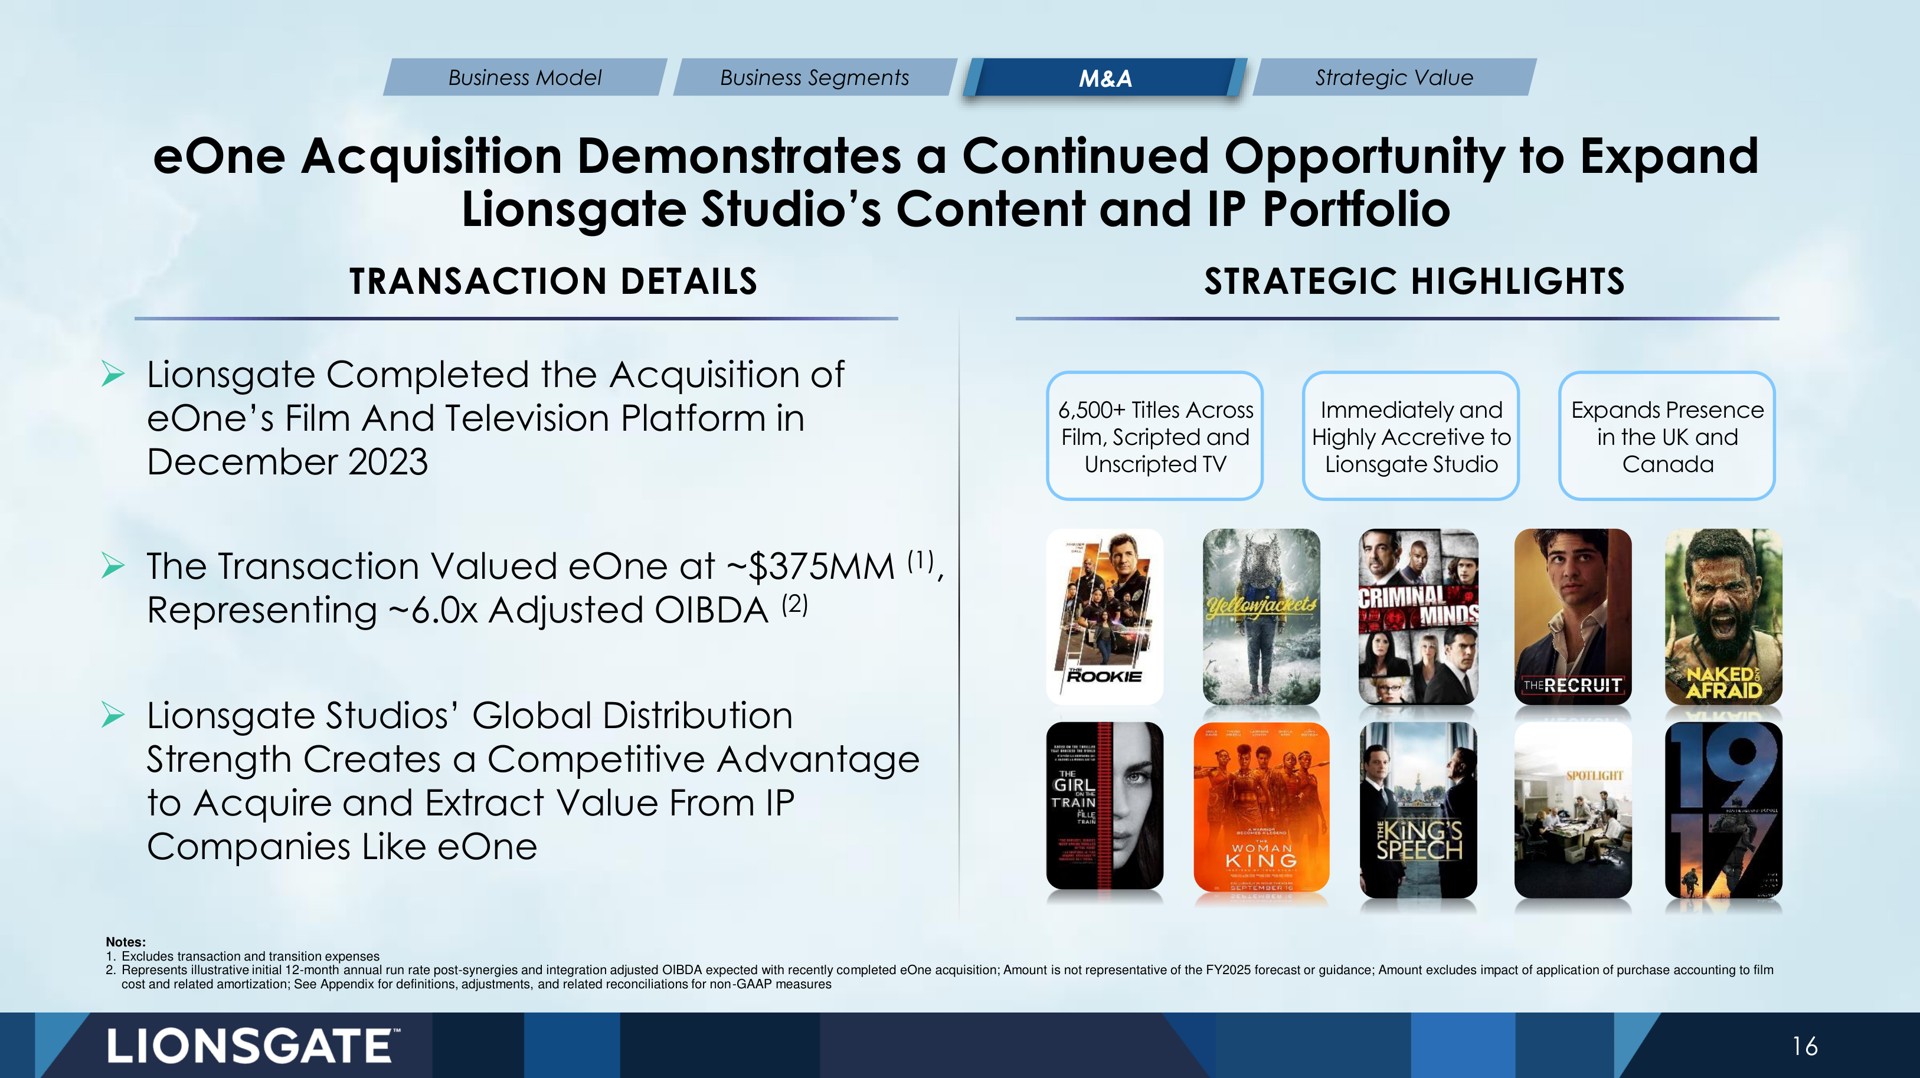 acquisition demonstrates a continued opportunity to expand studio content and portfolio | Lionsgate